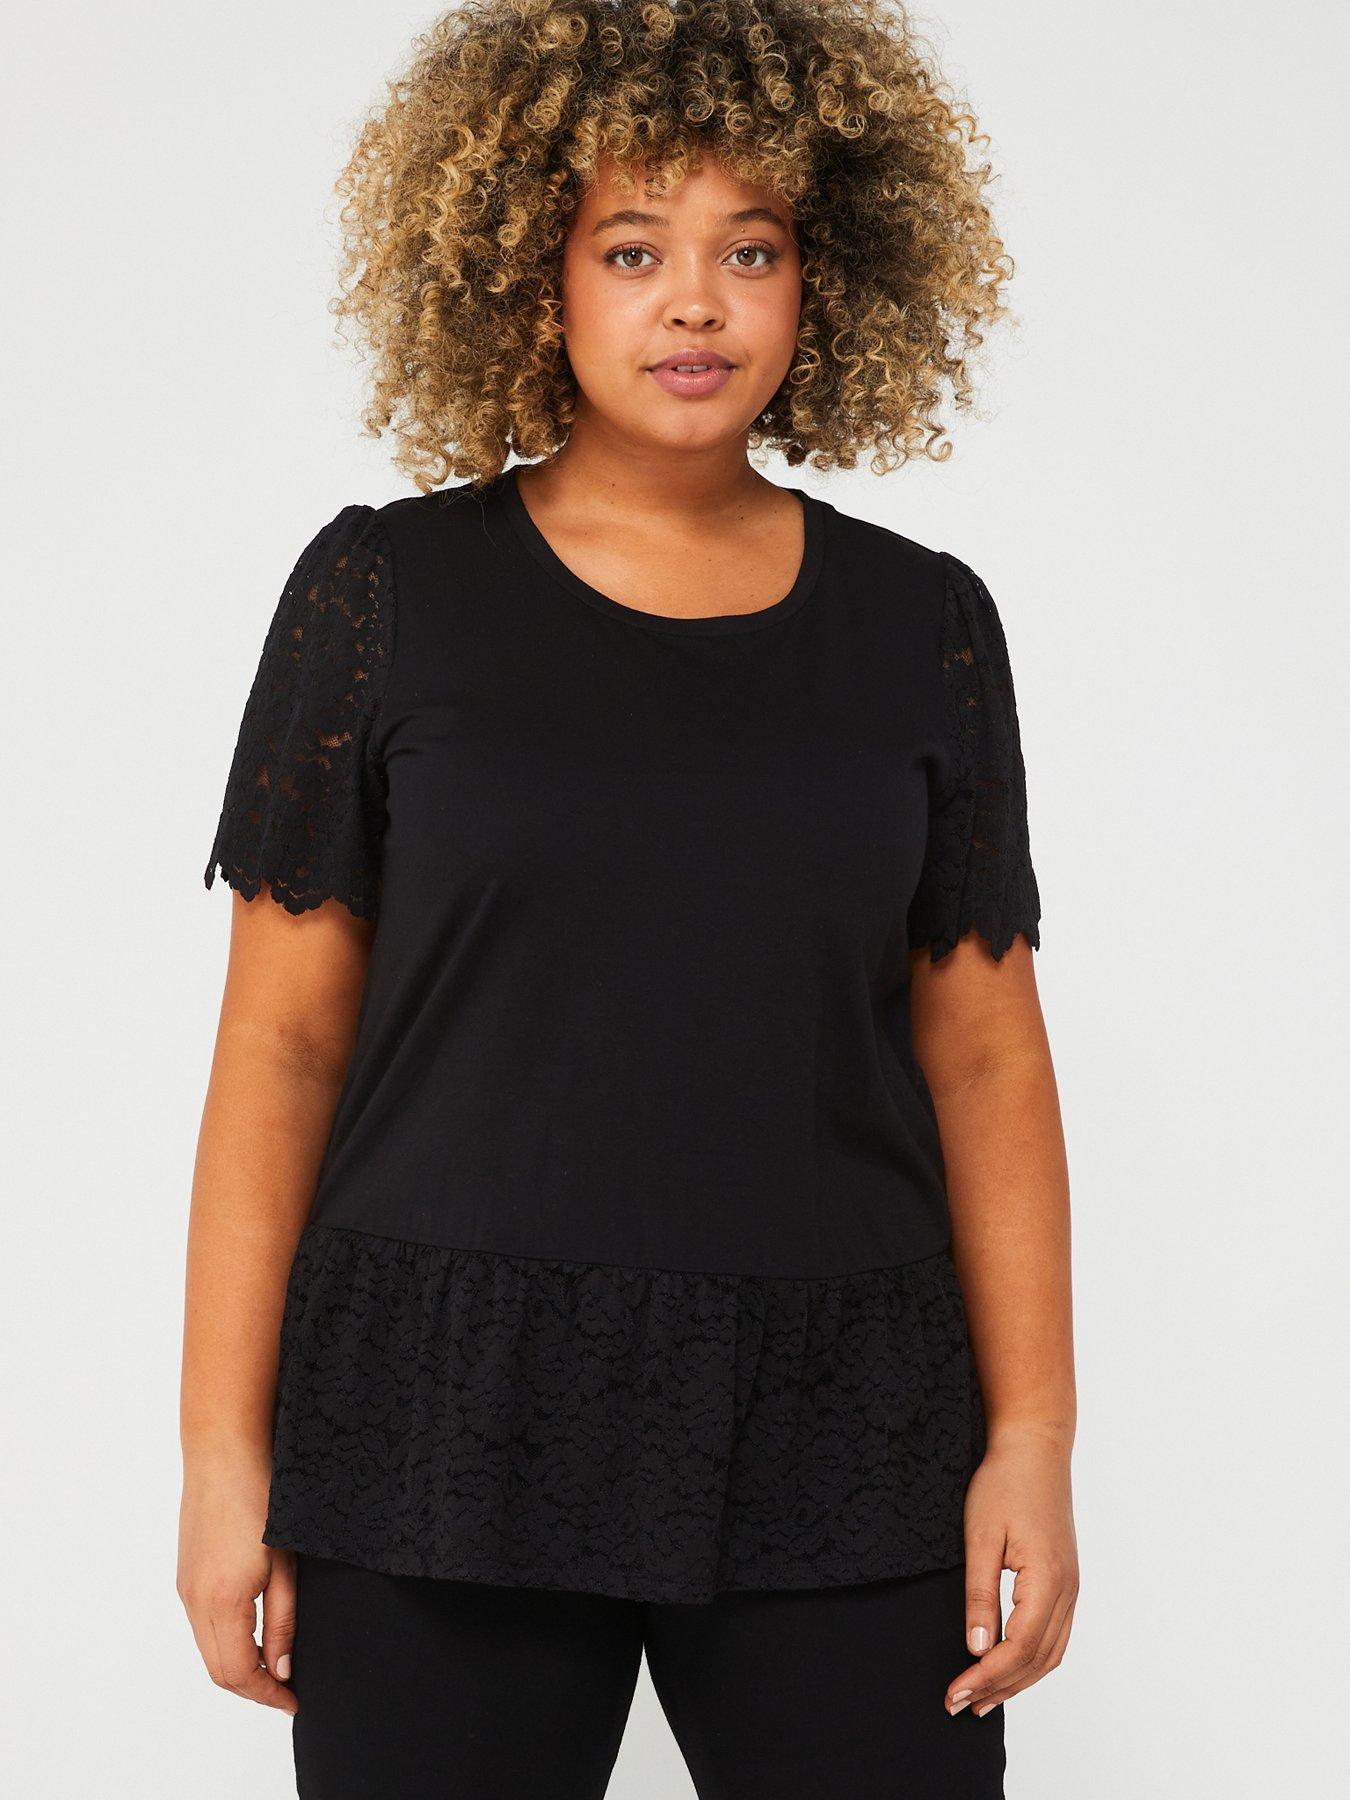 Going Out Tops, Plus Size, Tops & t-shirts, Women